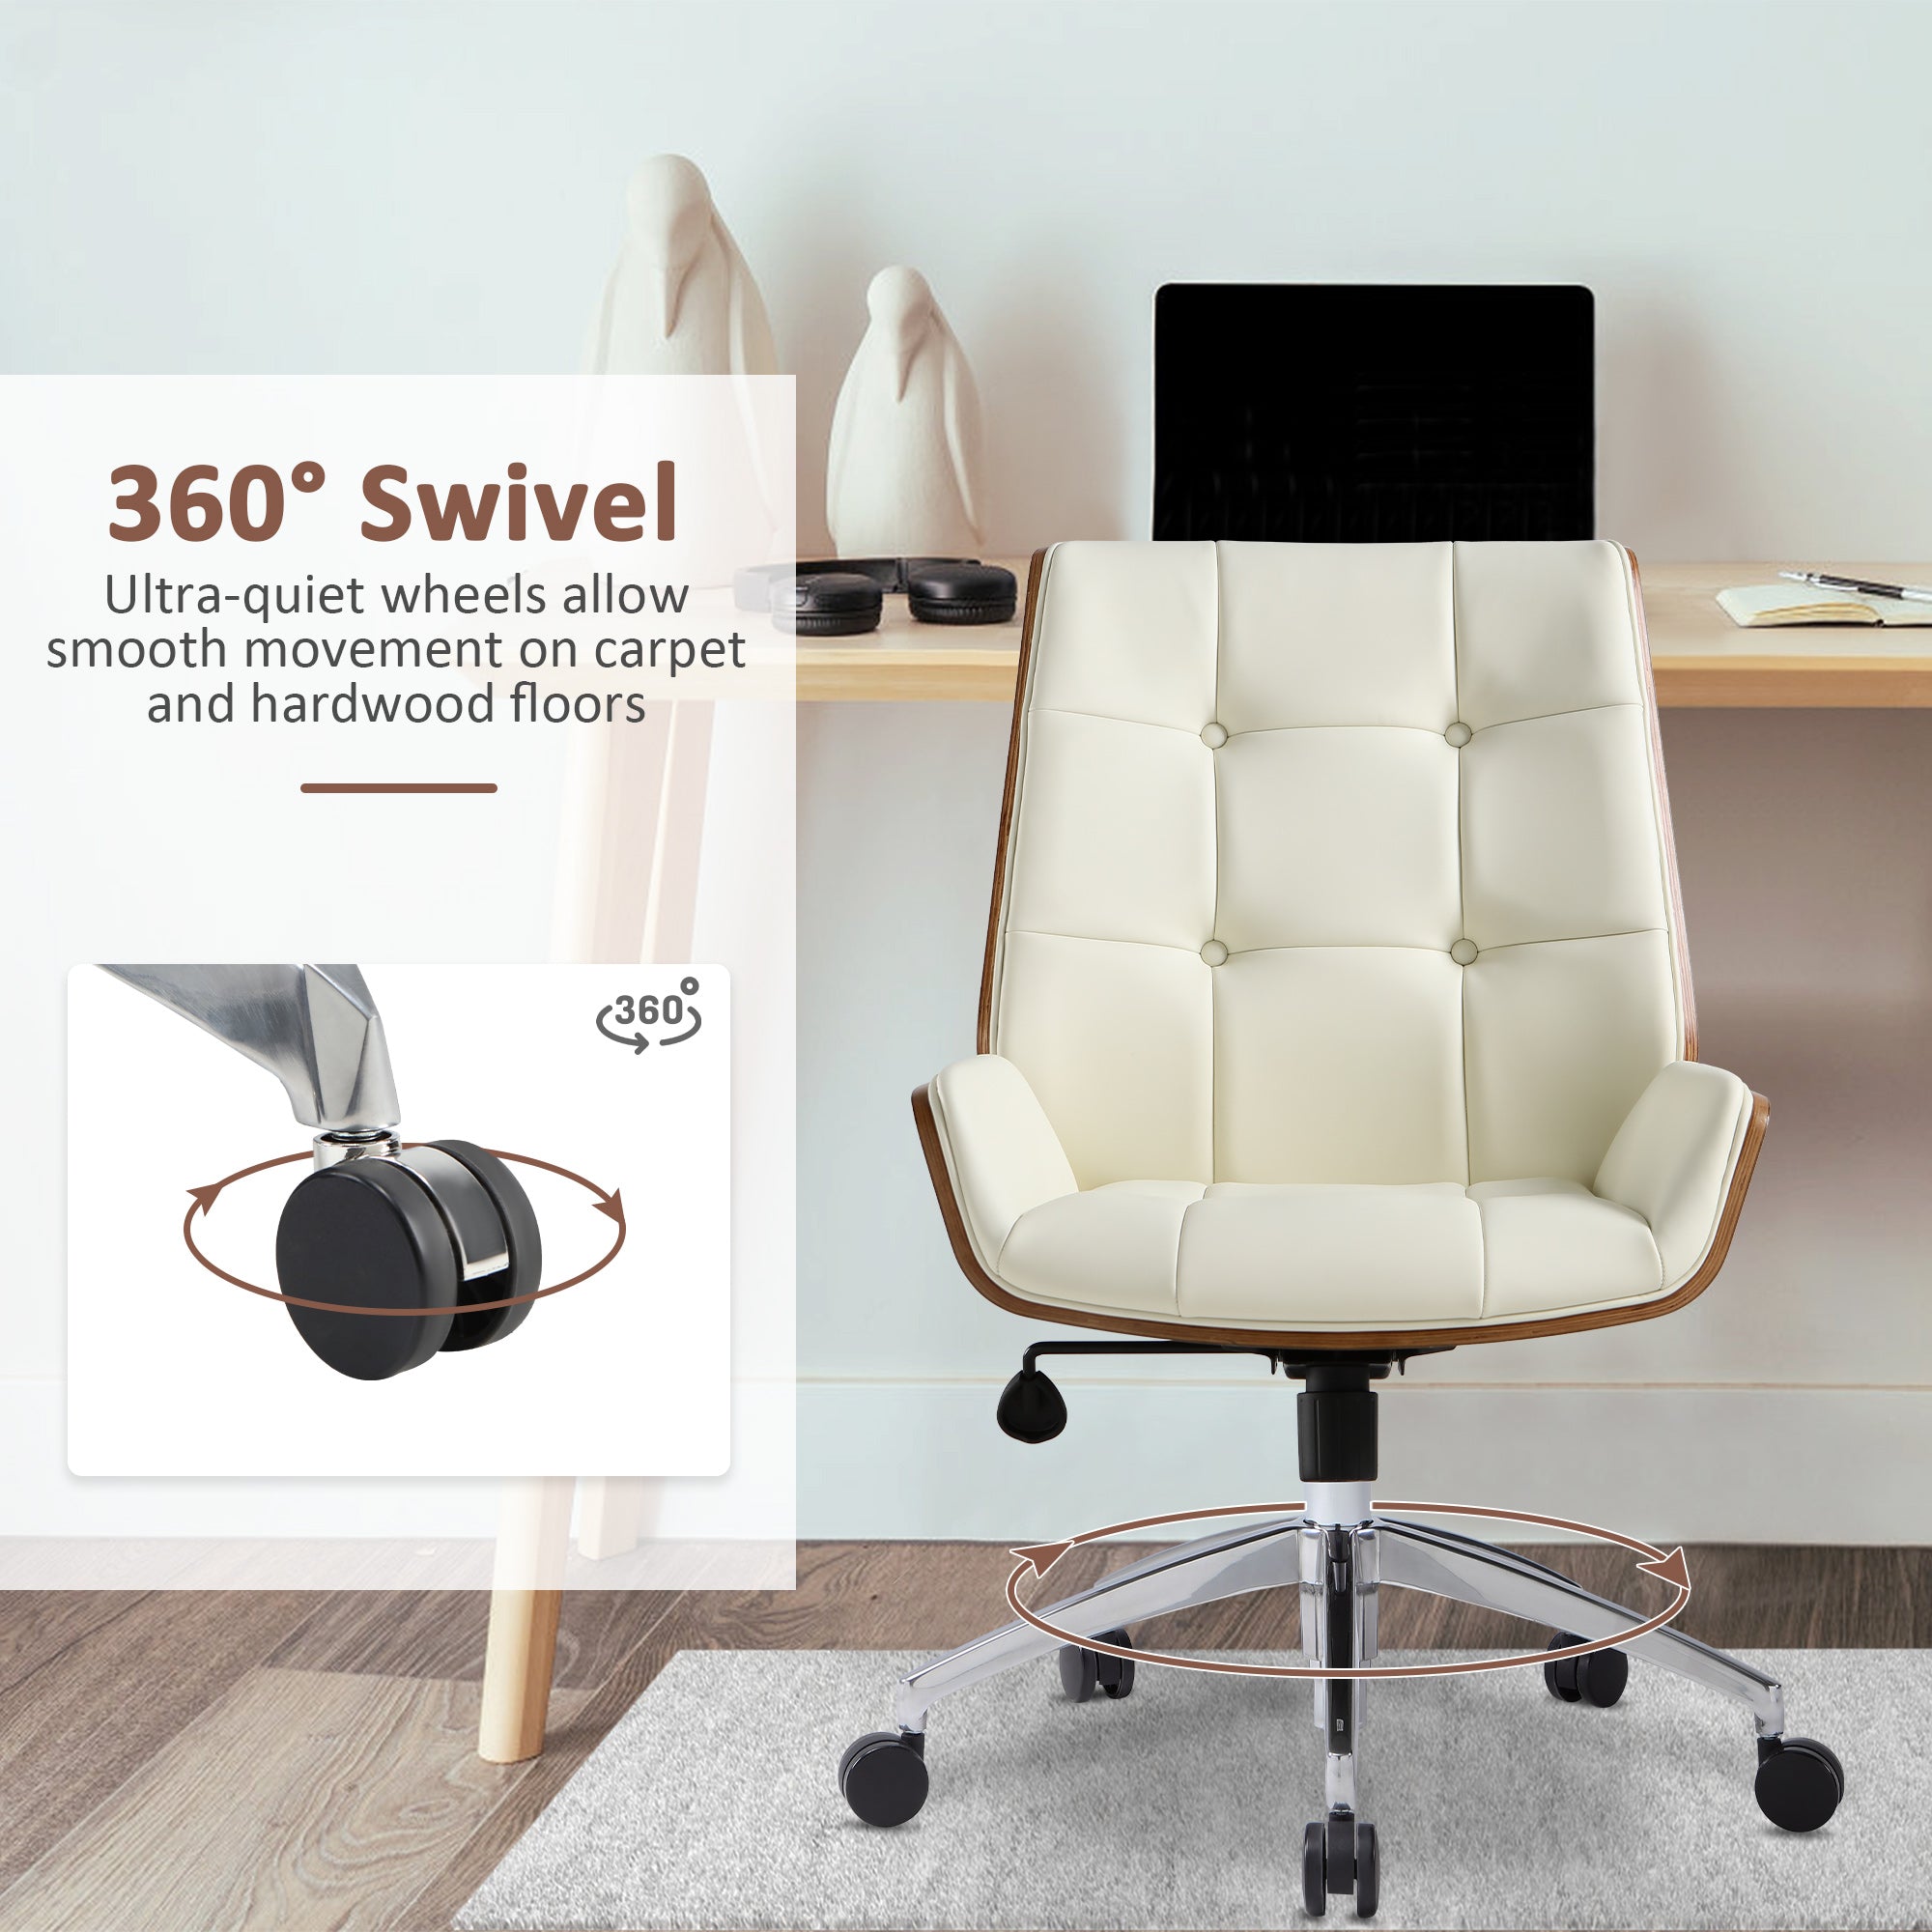 Executive Office Chair with Adjustable Height, Tilt Function, Solid Wood Arms and Base, 360° Swivel - Leather Office Chair for Office and Home Work in White